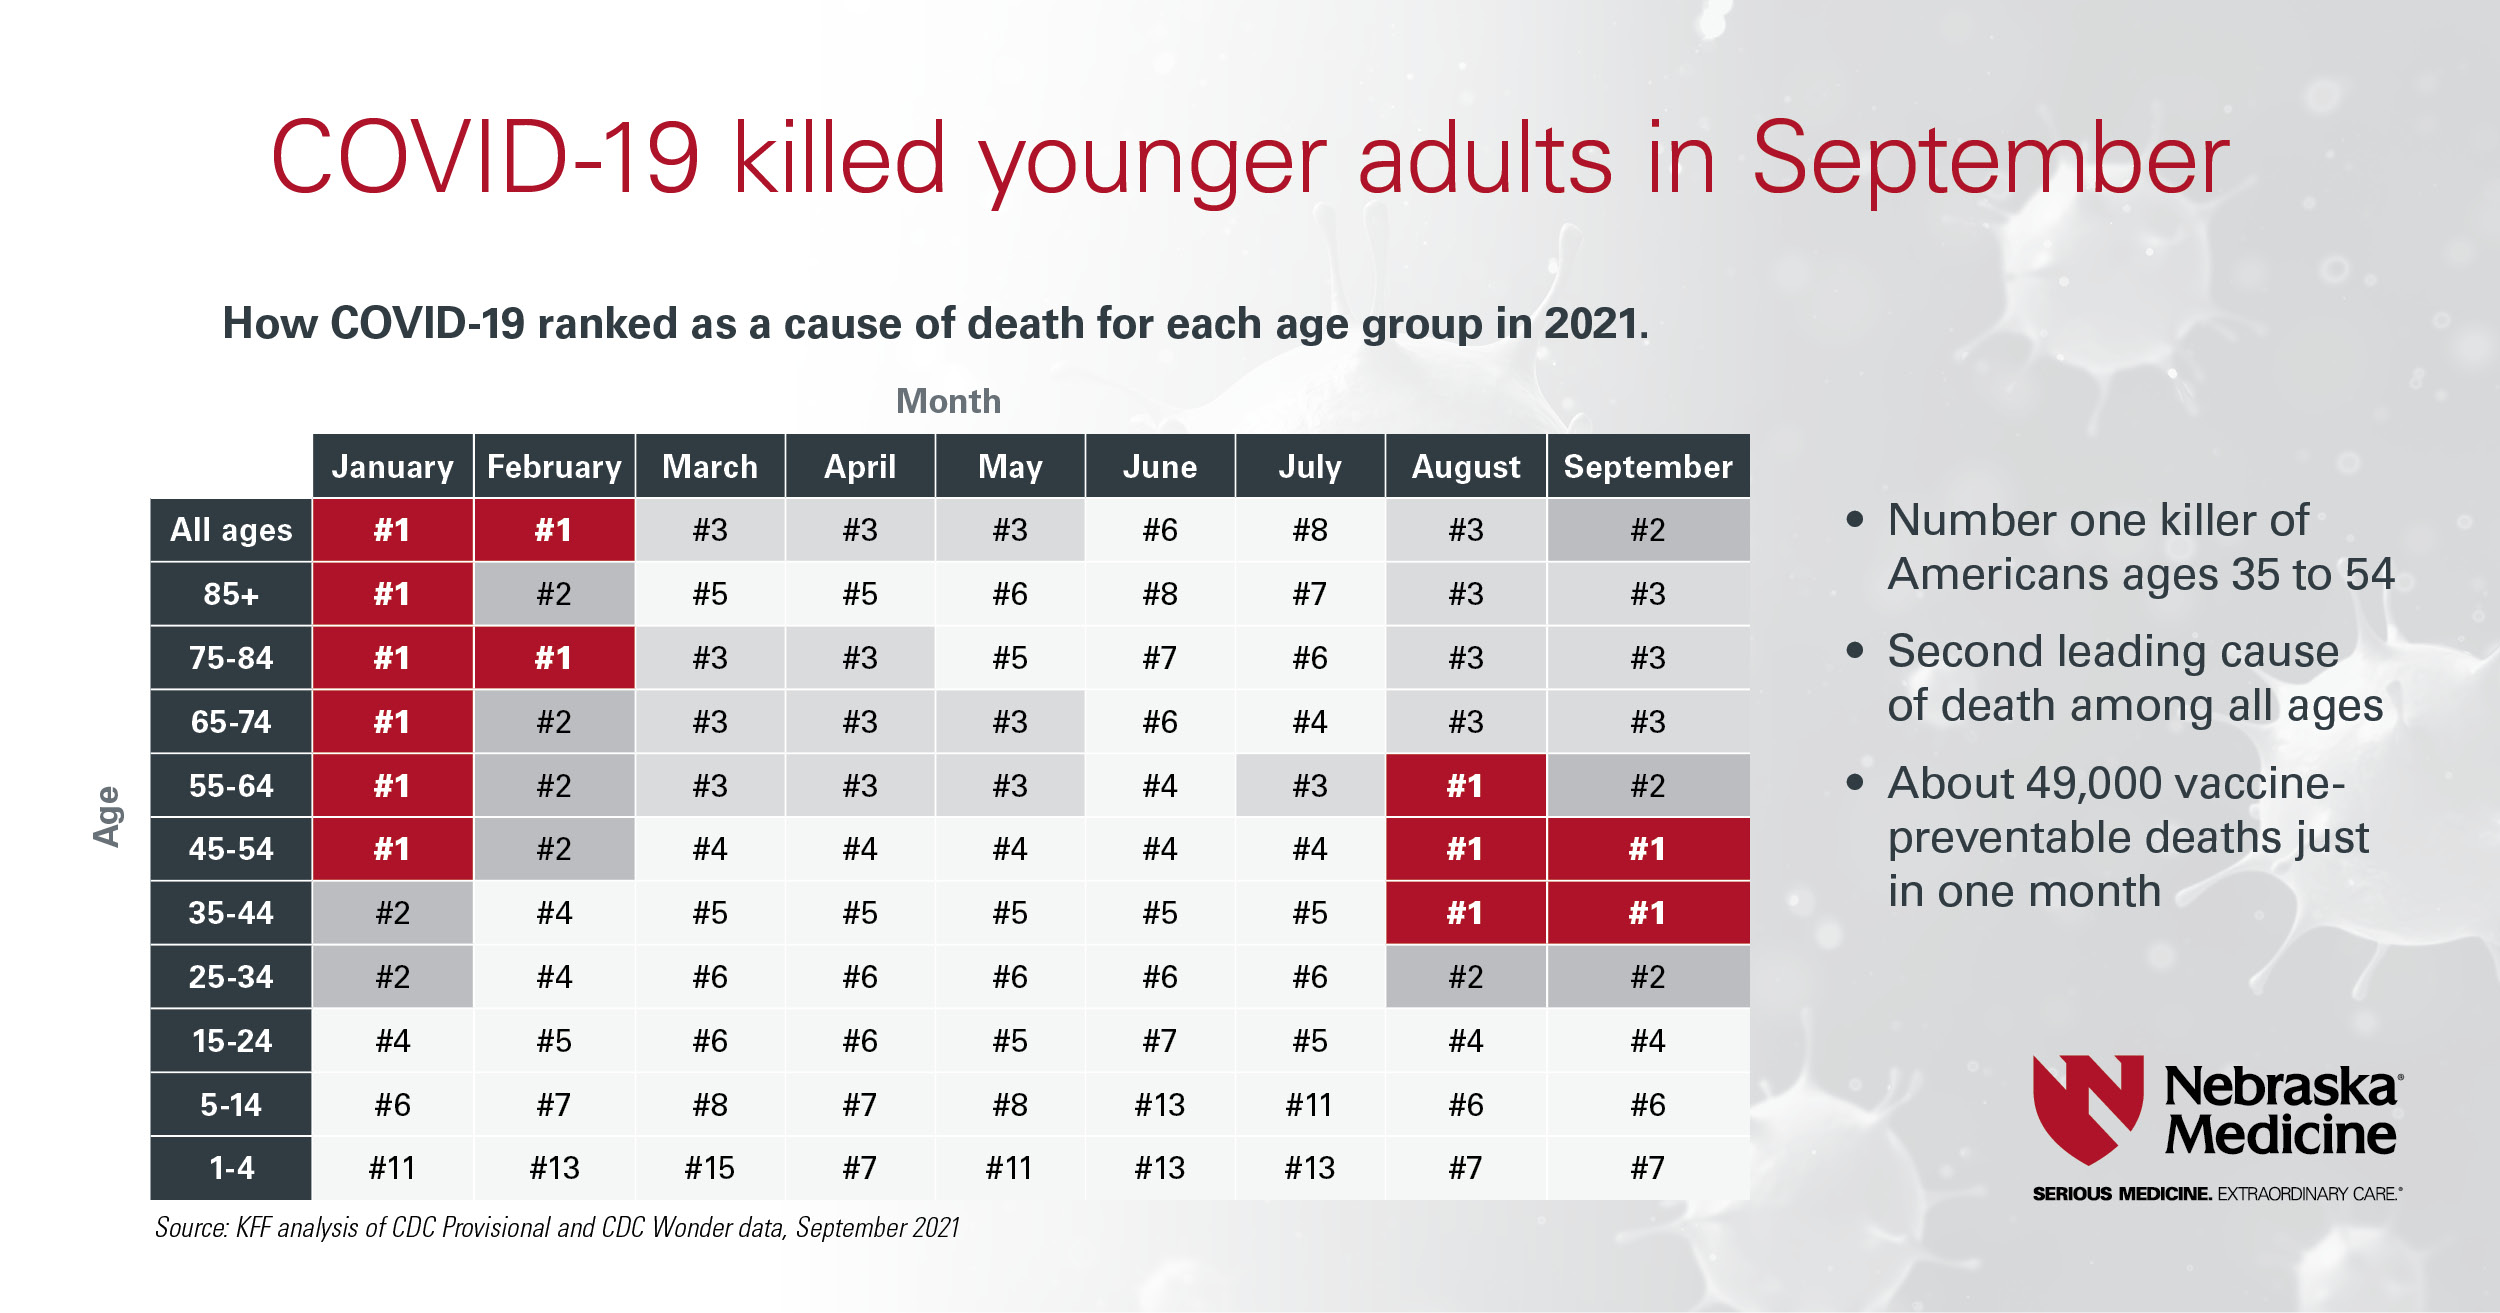 How COVID-19 ranked as a cause of death for each age group in 2021